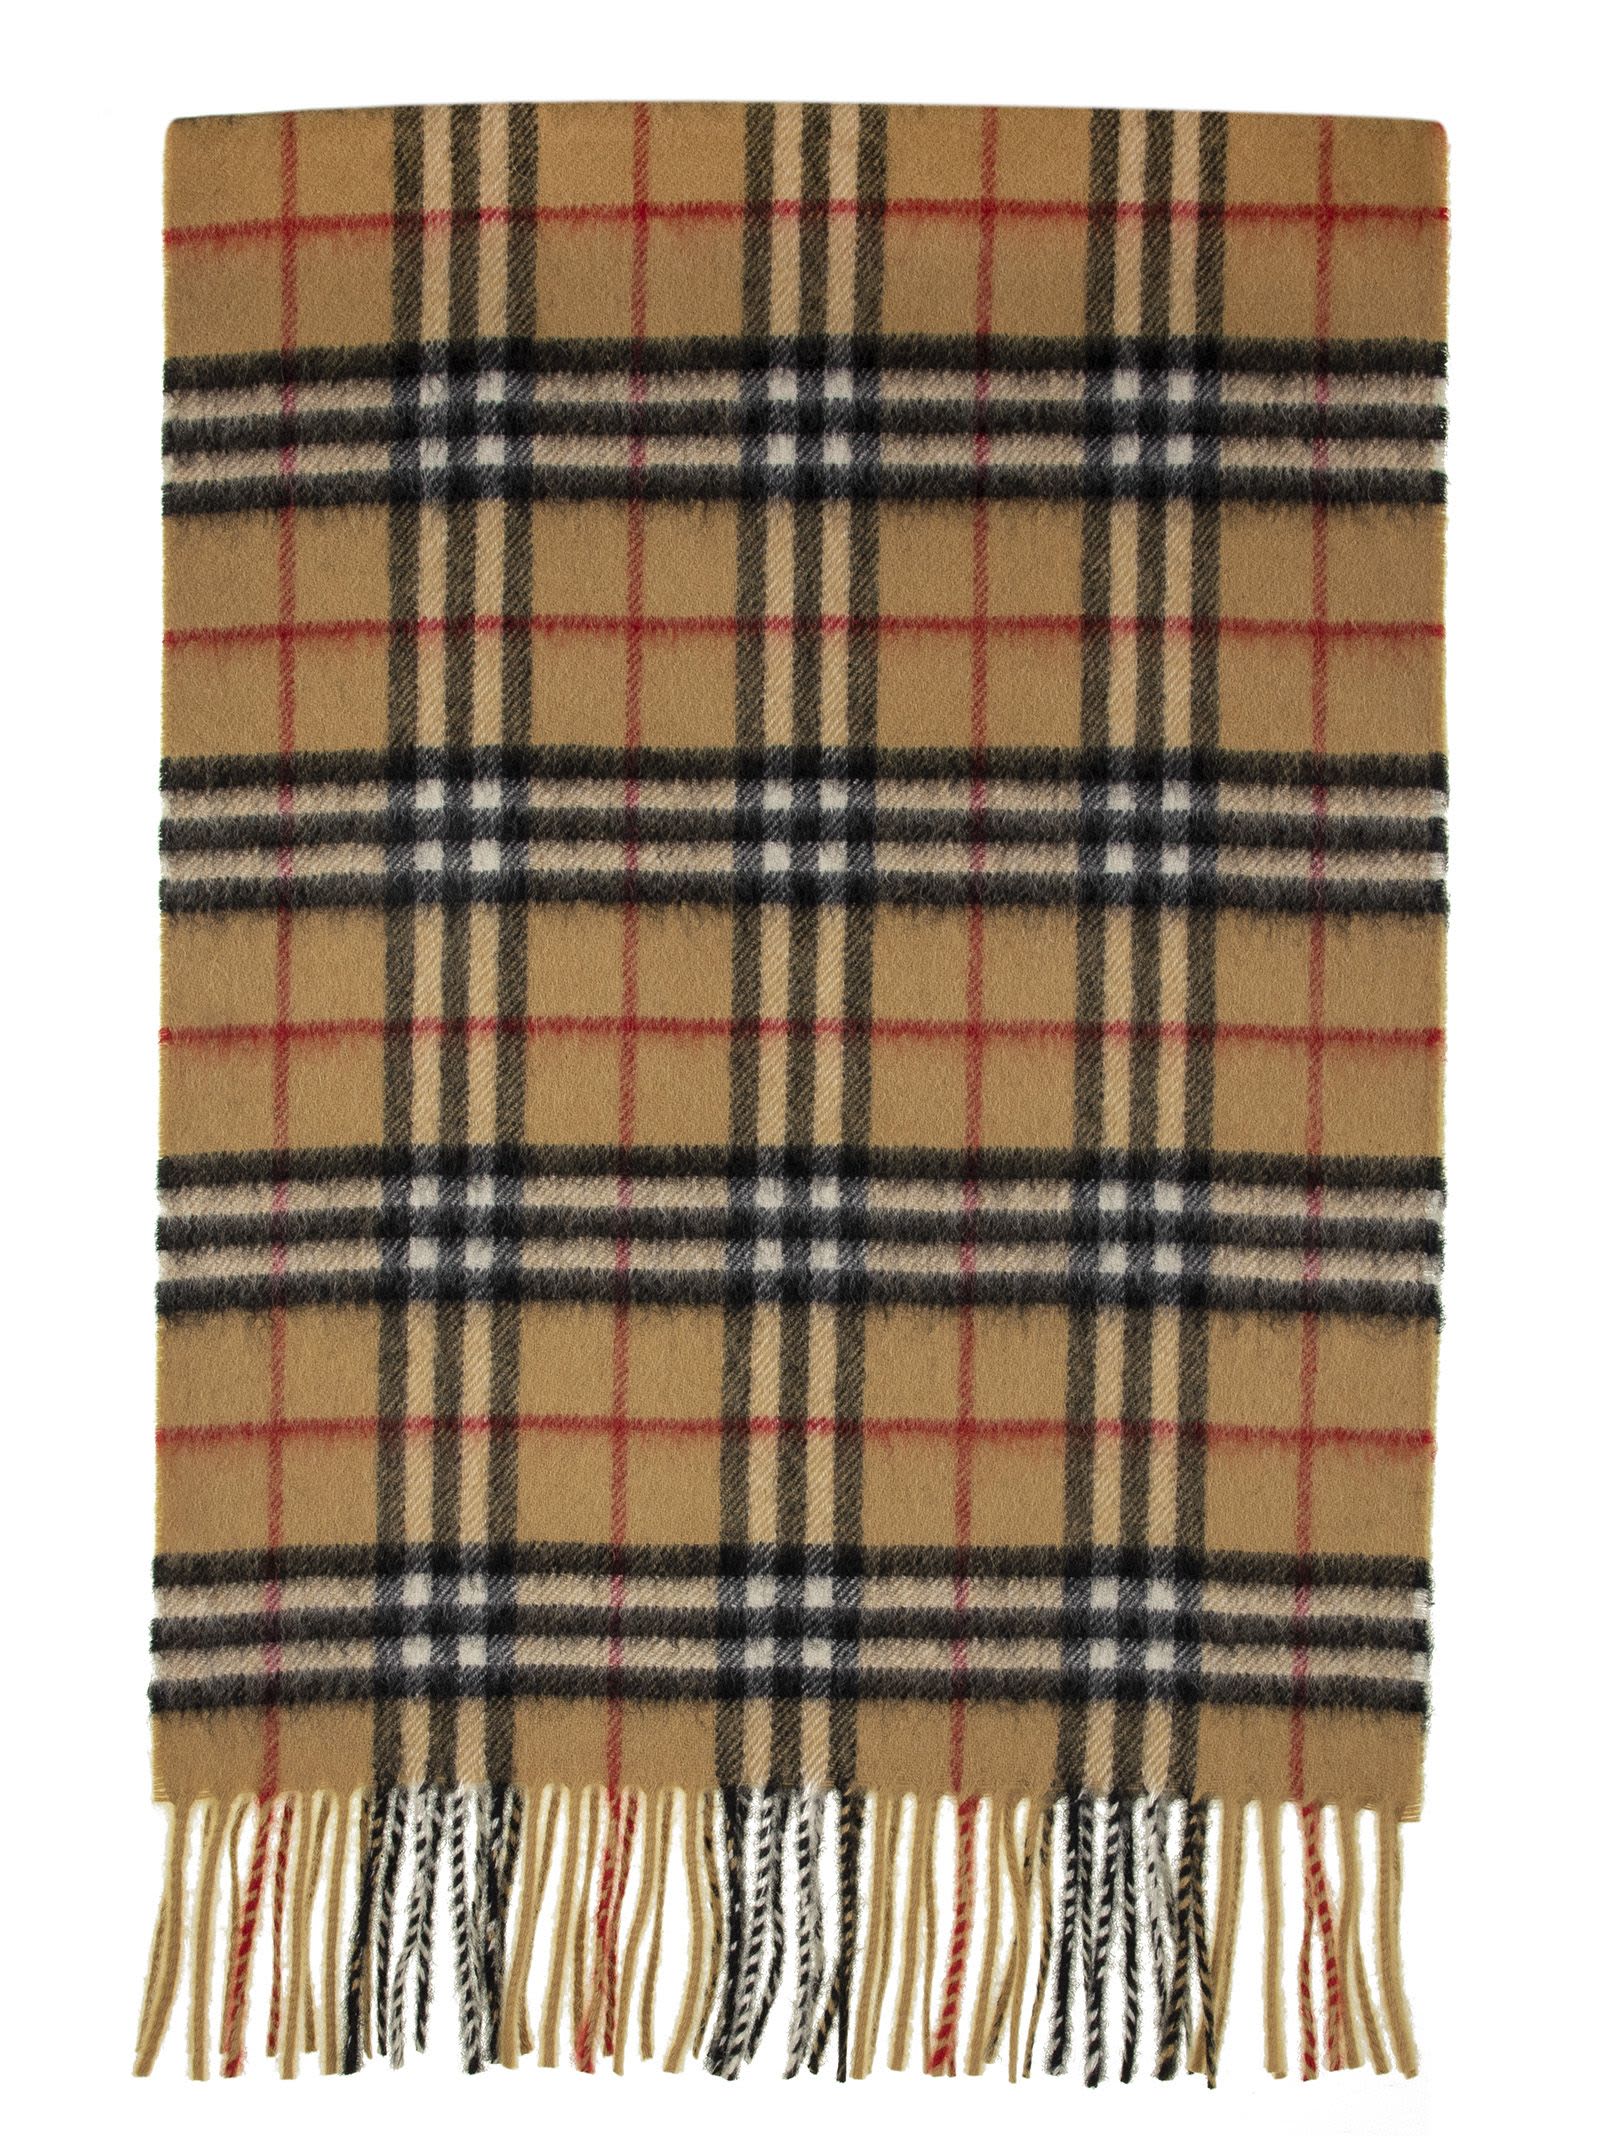 the classic vintage check cashmere scarf